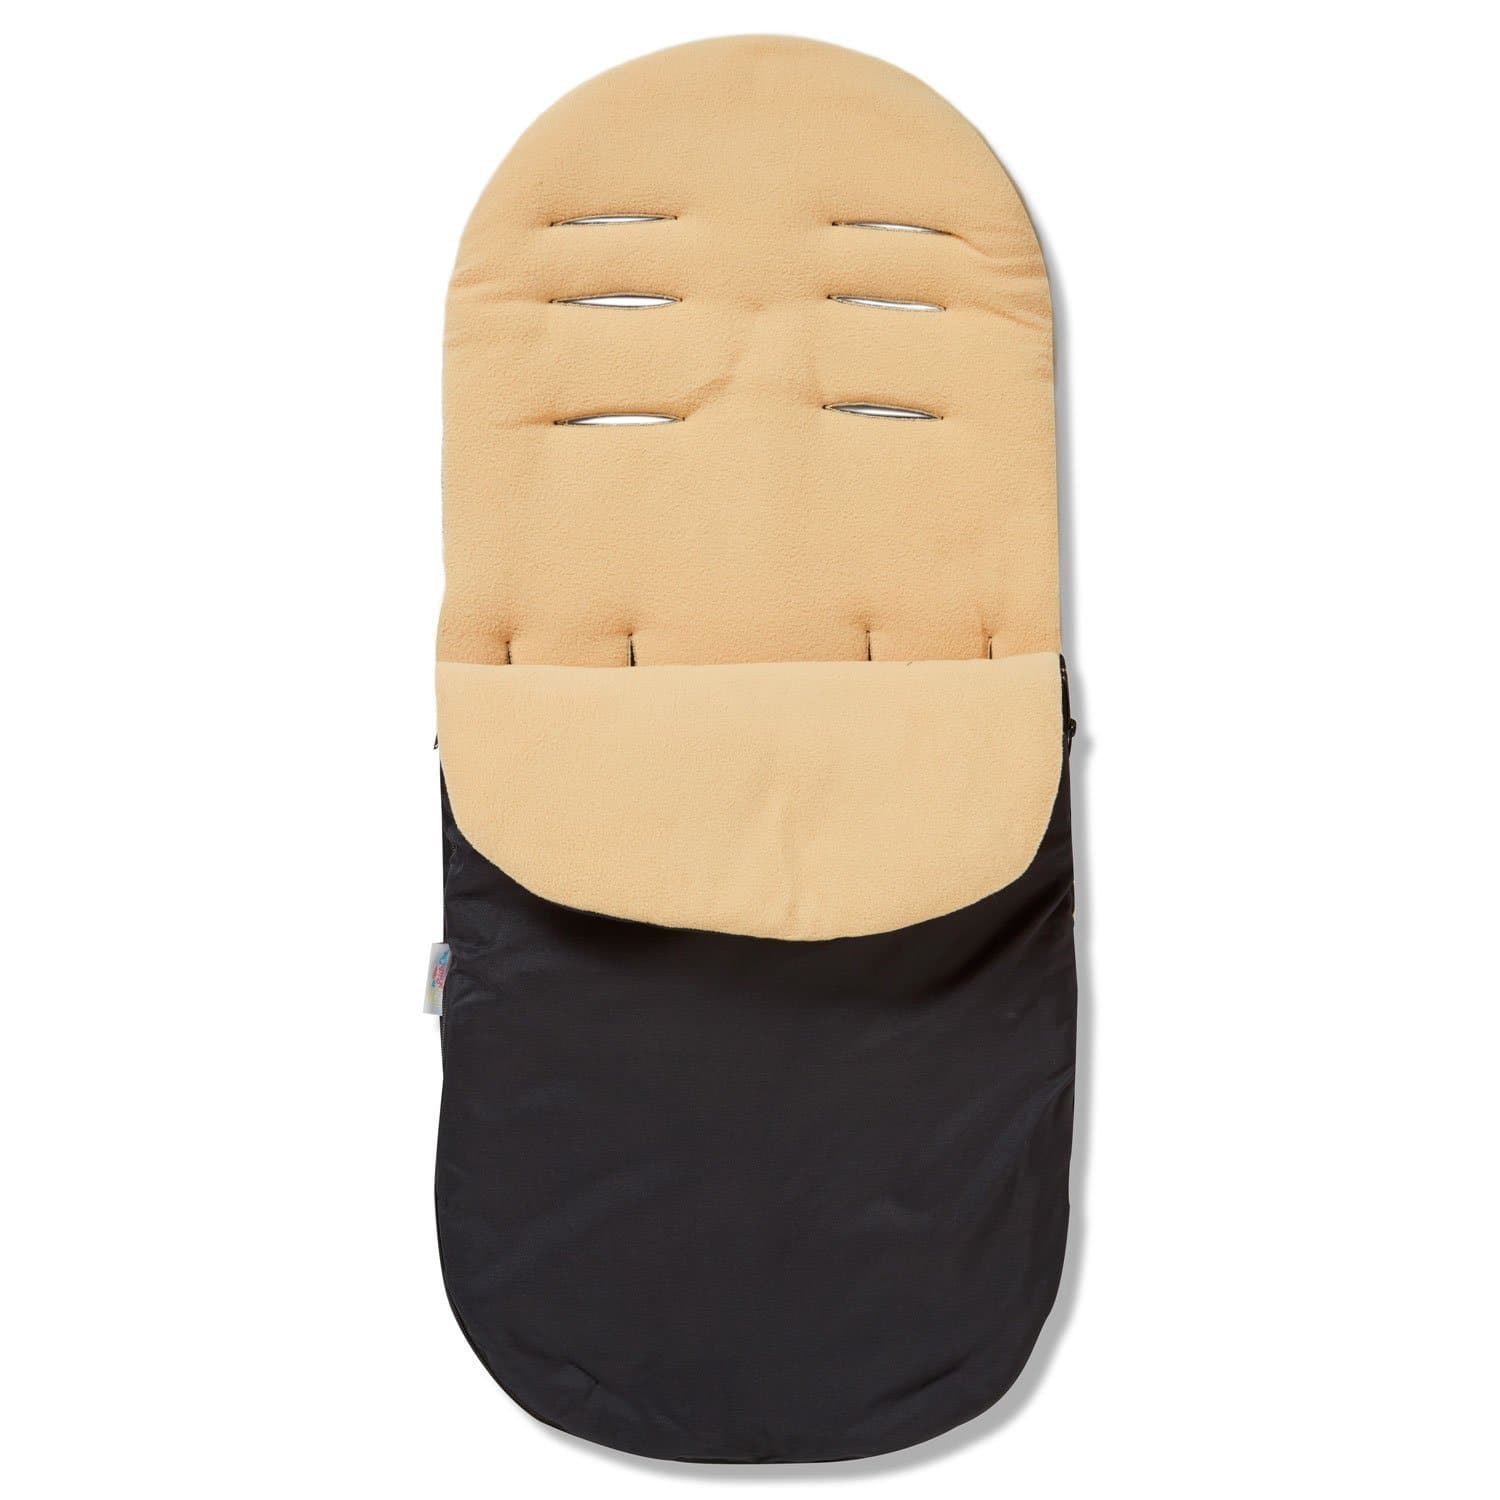 Footmuff / Cosy Toes Compatible with Roma - For Your Little One